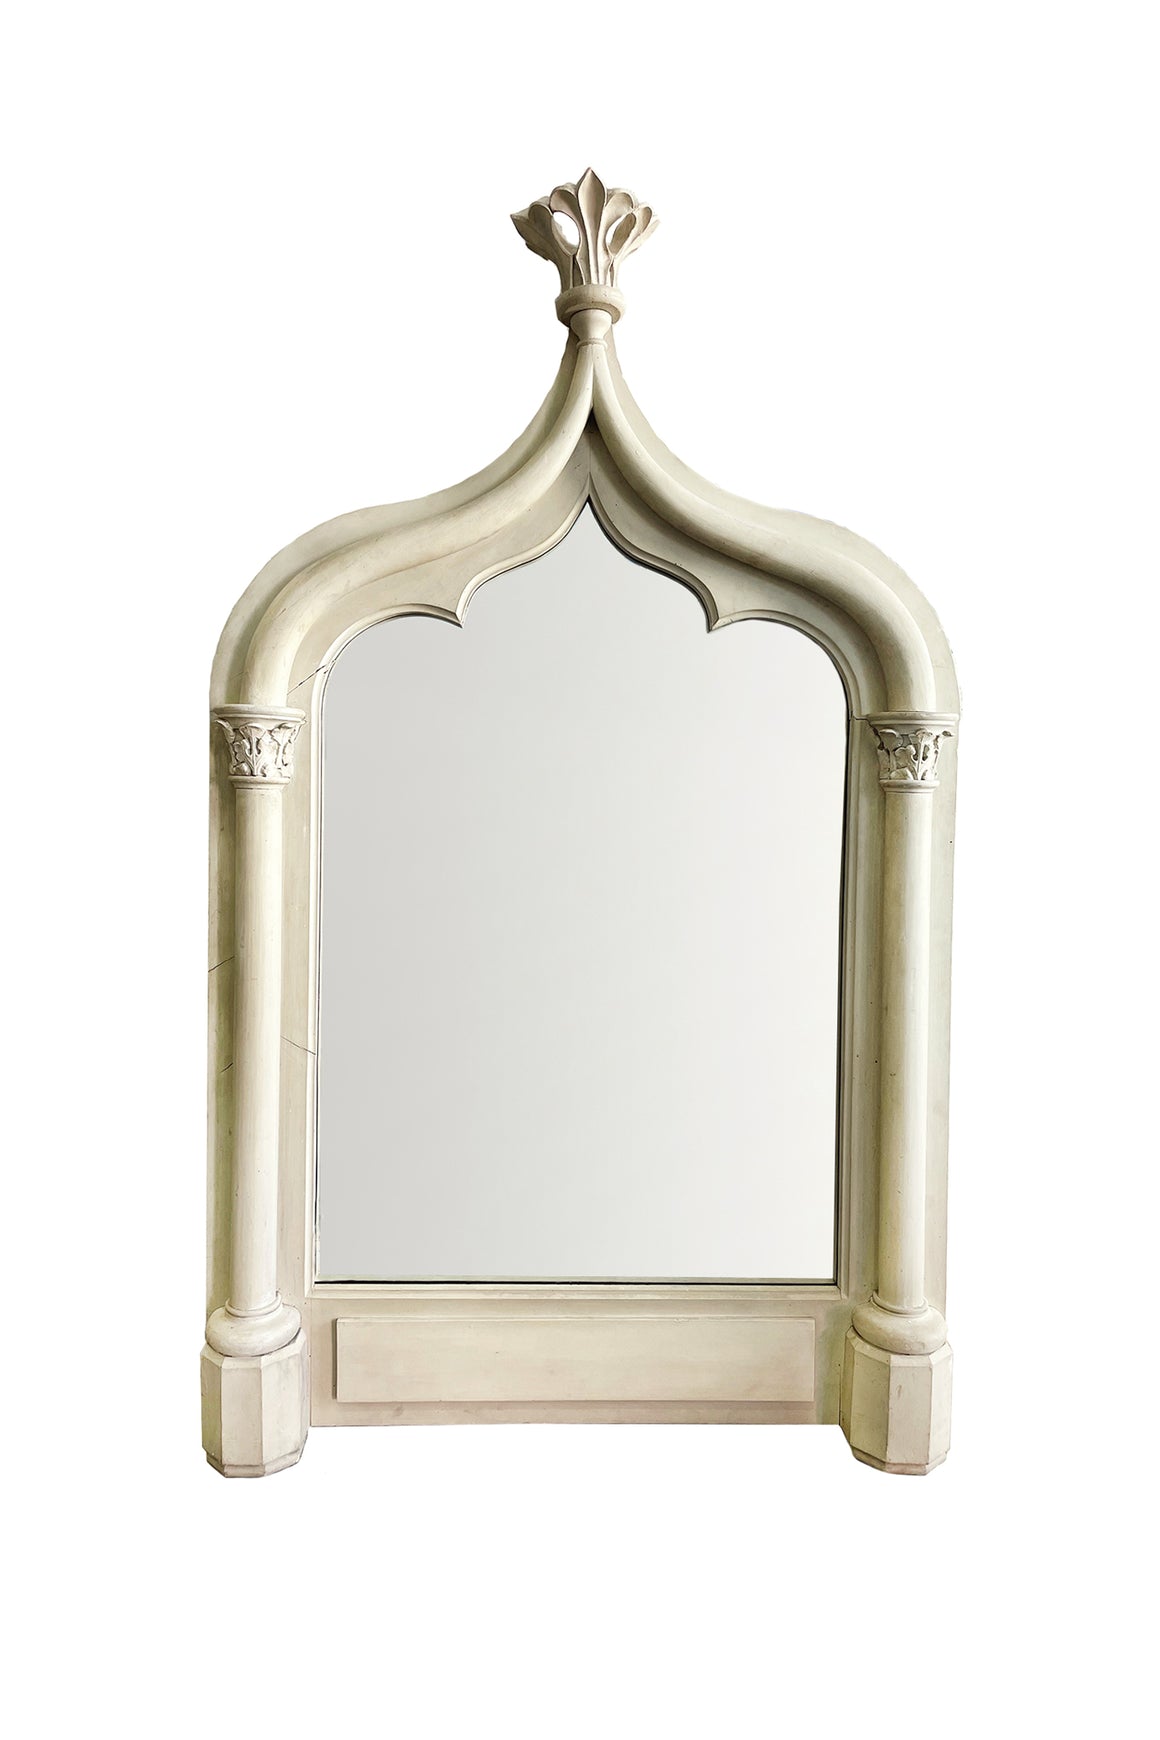 20th Century Gothic Revival Style Wall Mirror